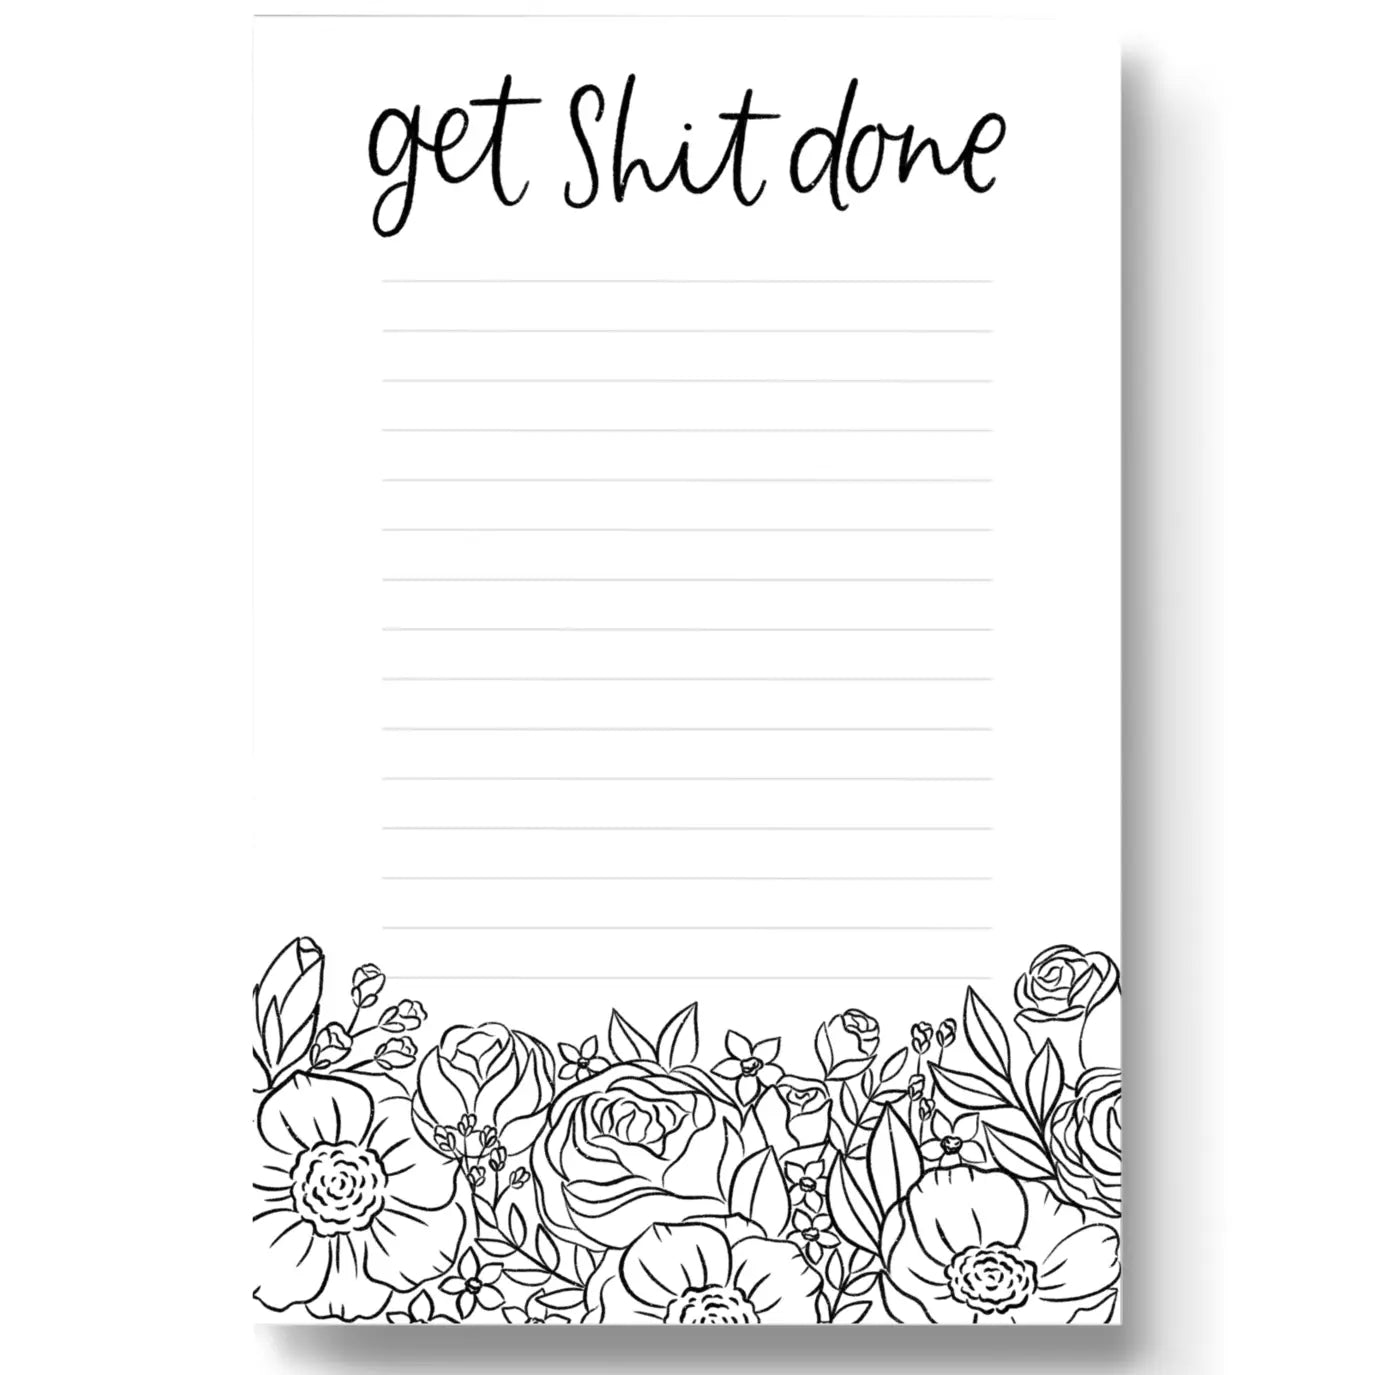 Get shit Done 4x6 Post It Notes